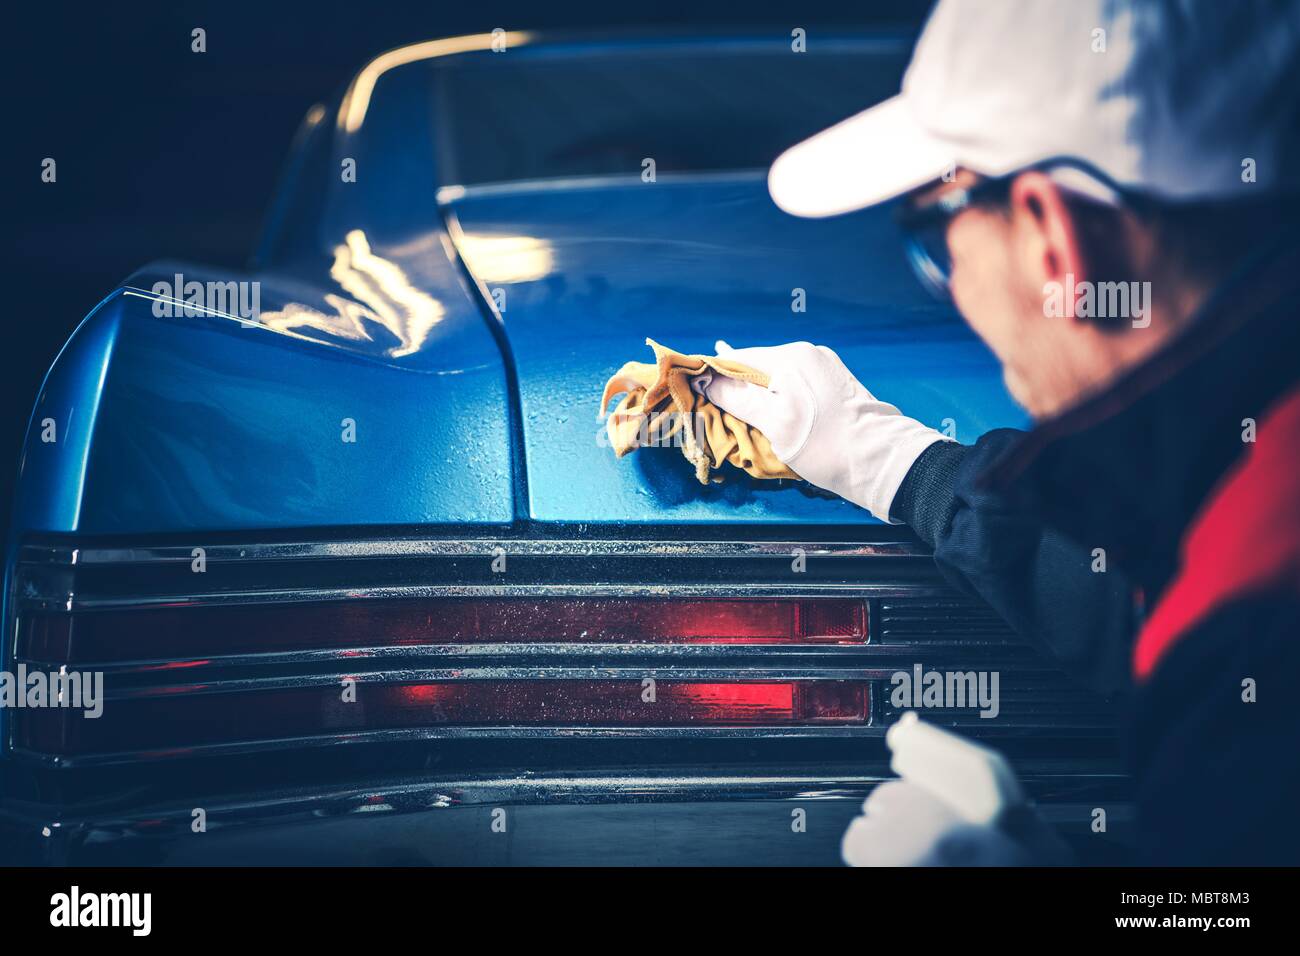 Vintage Classic Car Cleaning. Blue American Muscle Car Cleaned by His Passionate Owner. Stock Photo